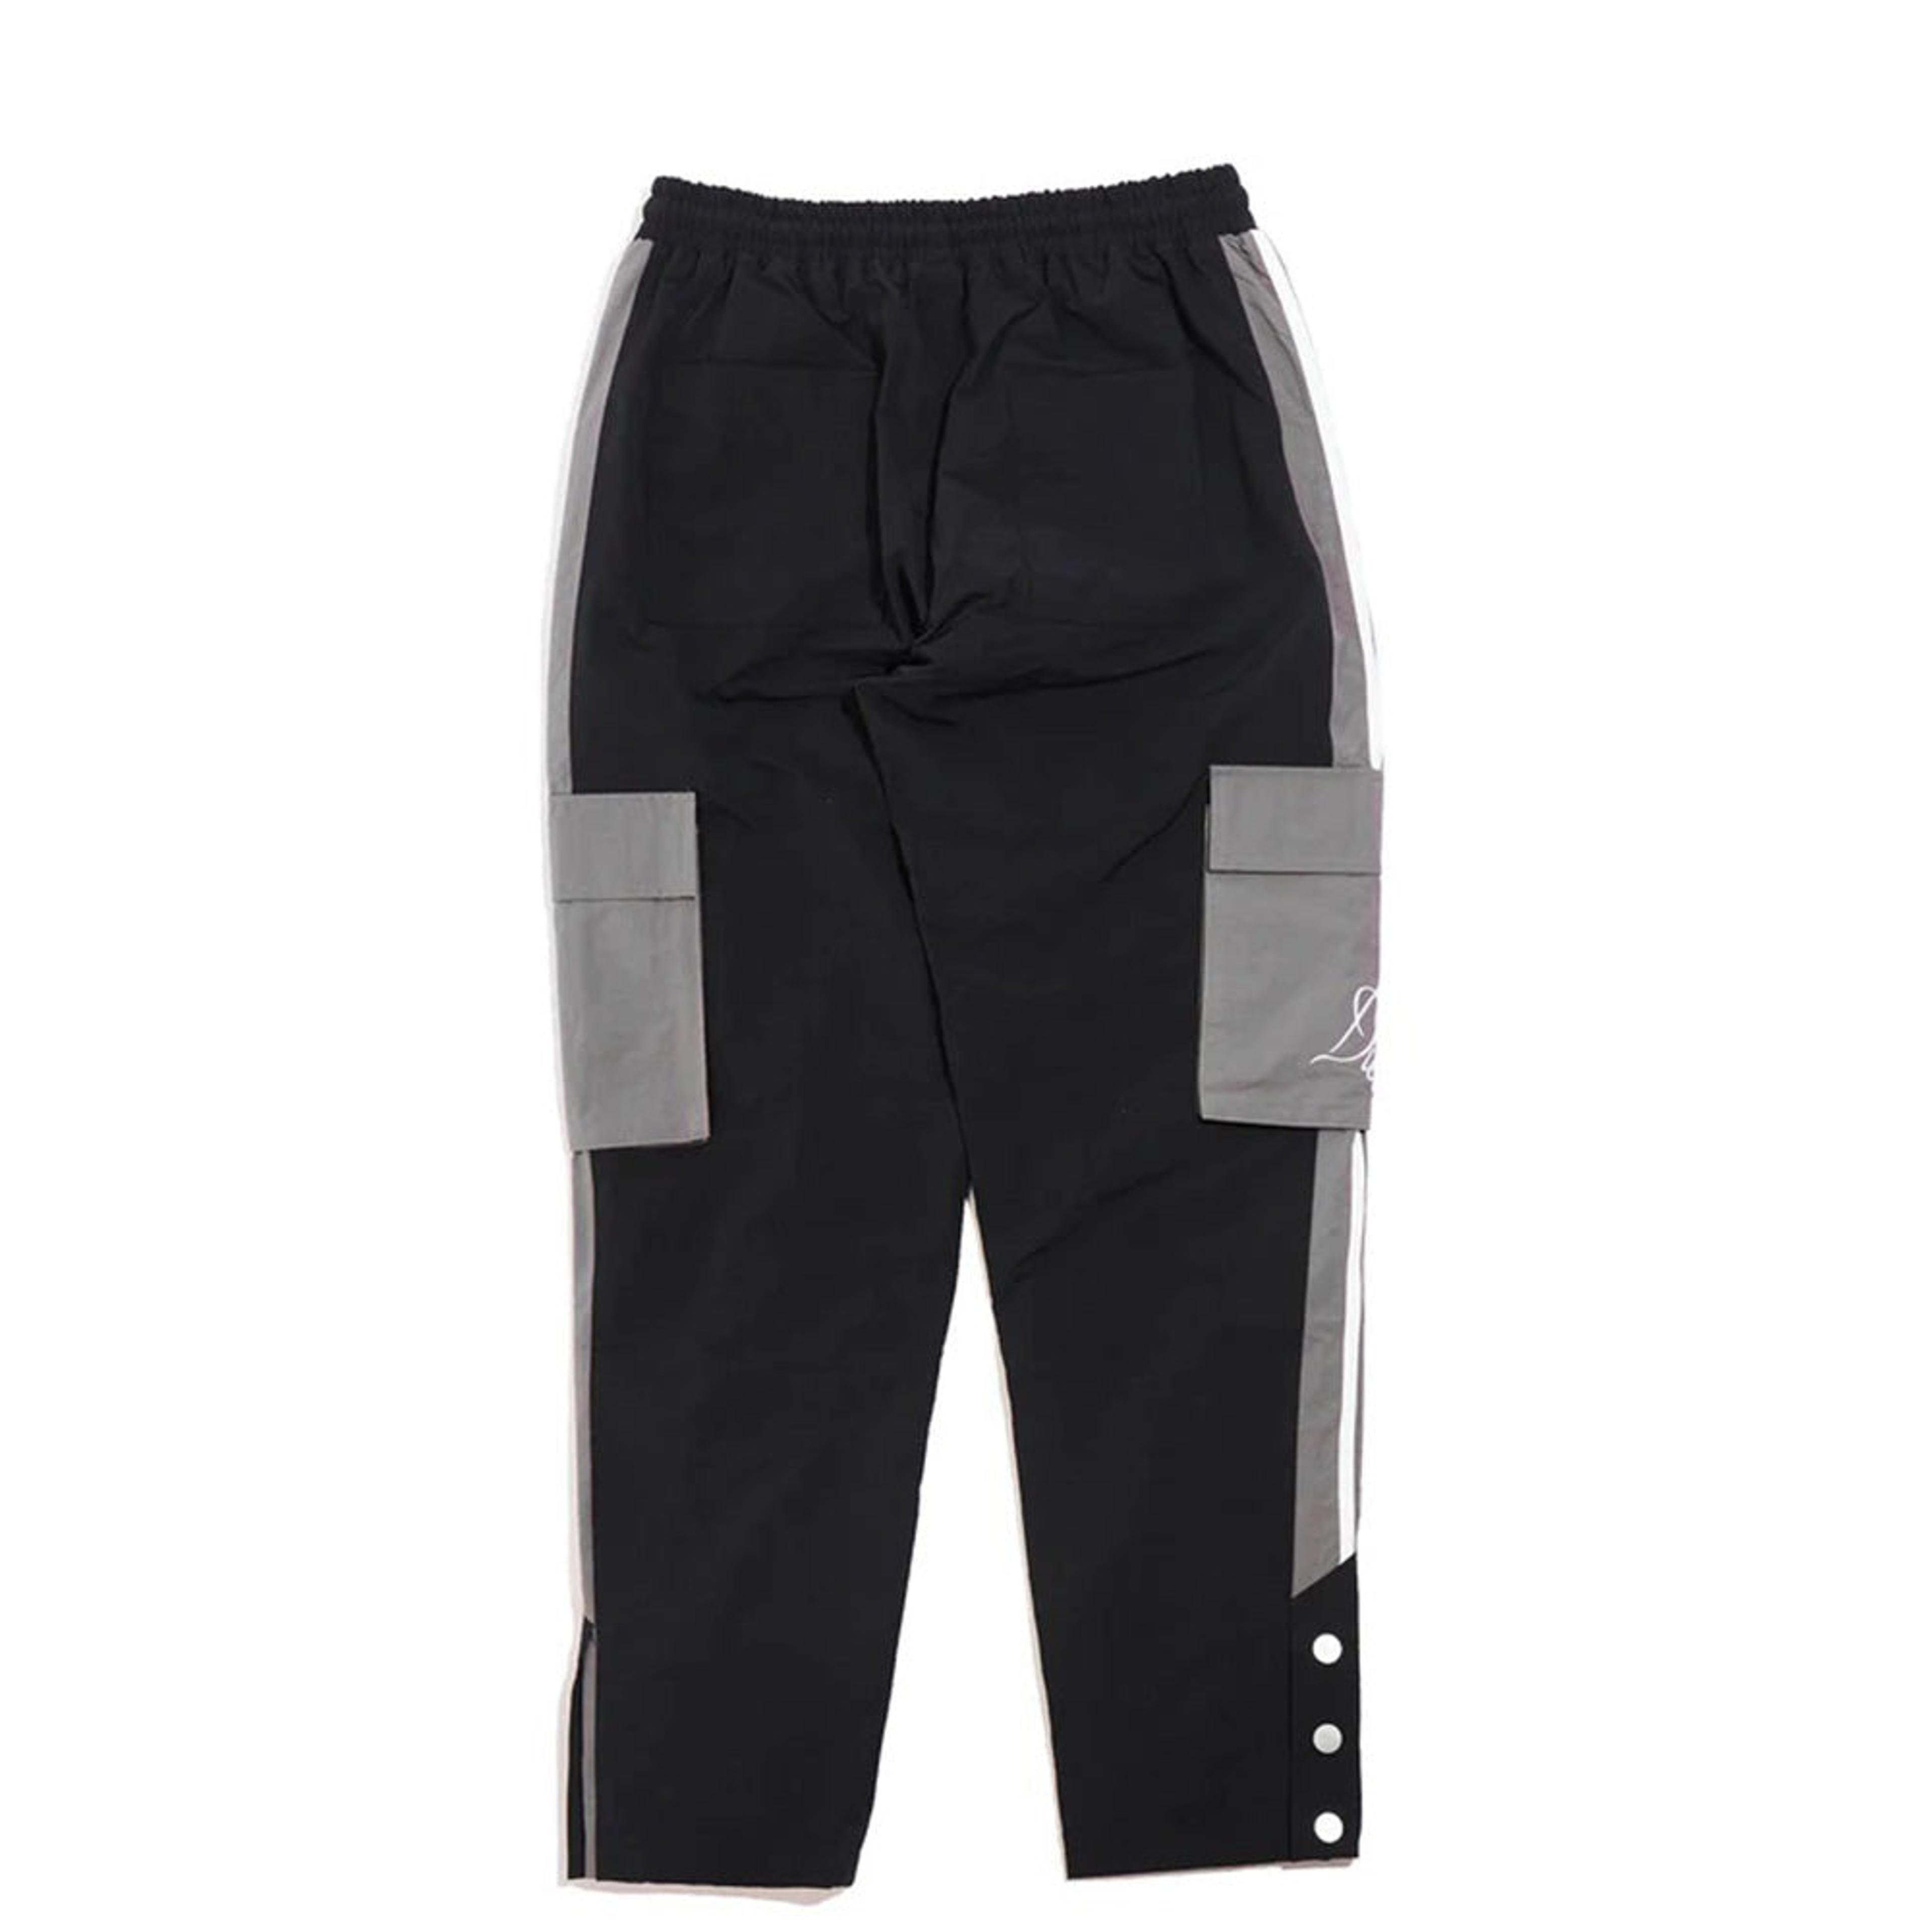 Alternate View 1 of Diet Starts Monday Cargo Track Pants